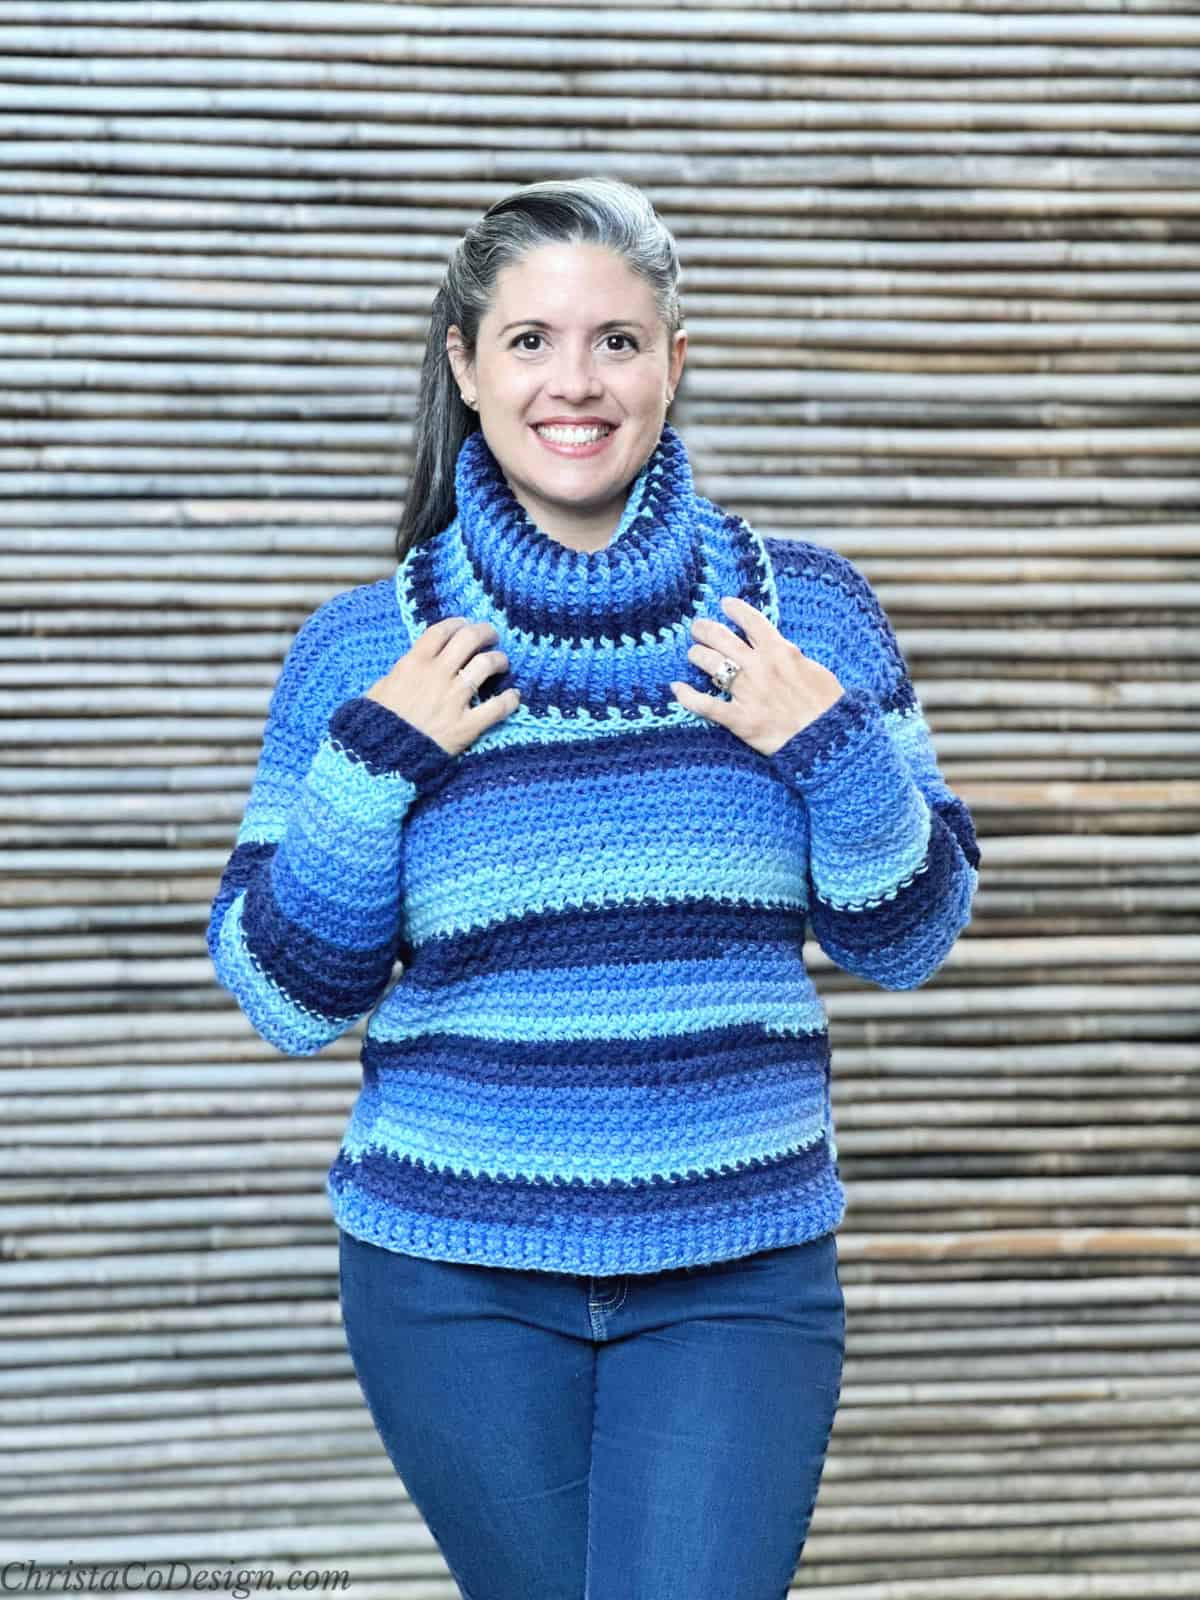 Woman in blue striped crochet sweater smiling with hands on cowl neck.